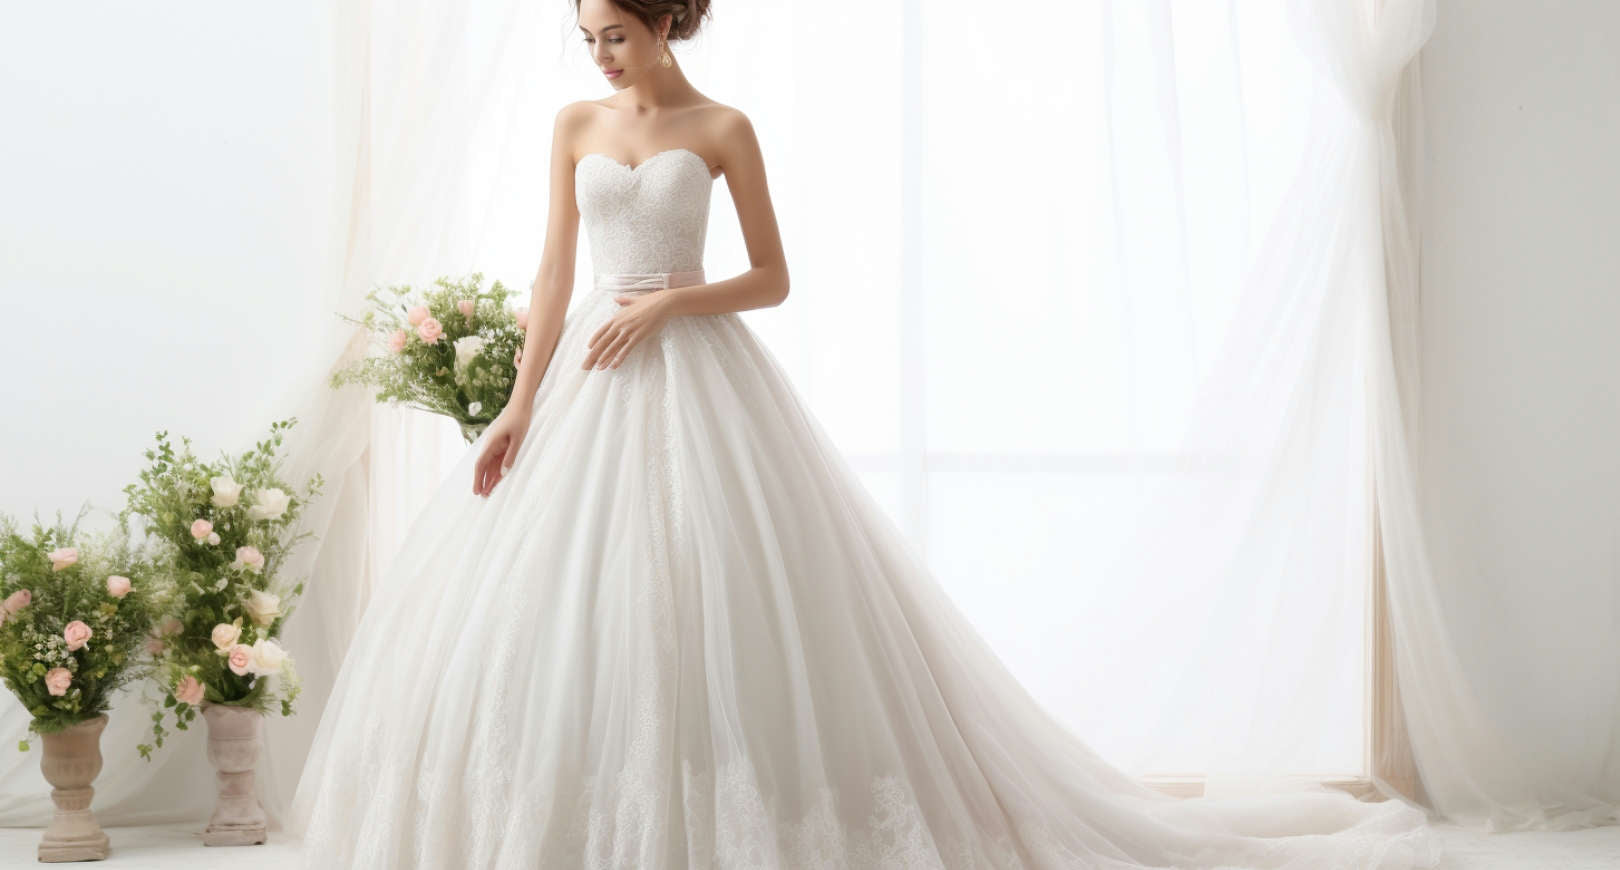 How to Choose Casual Wedding Dresses for Different Venues